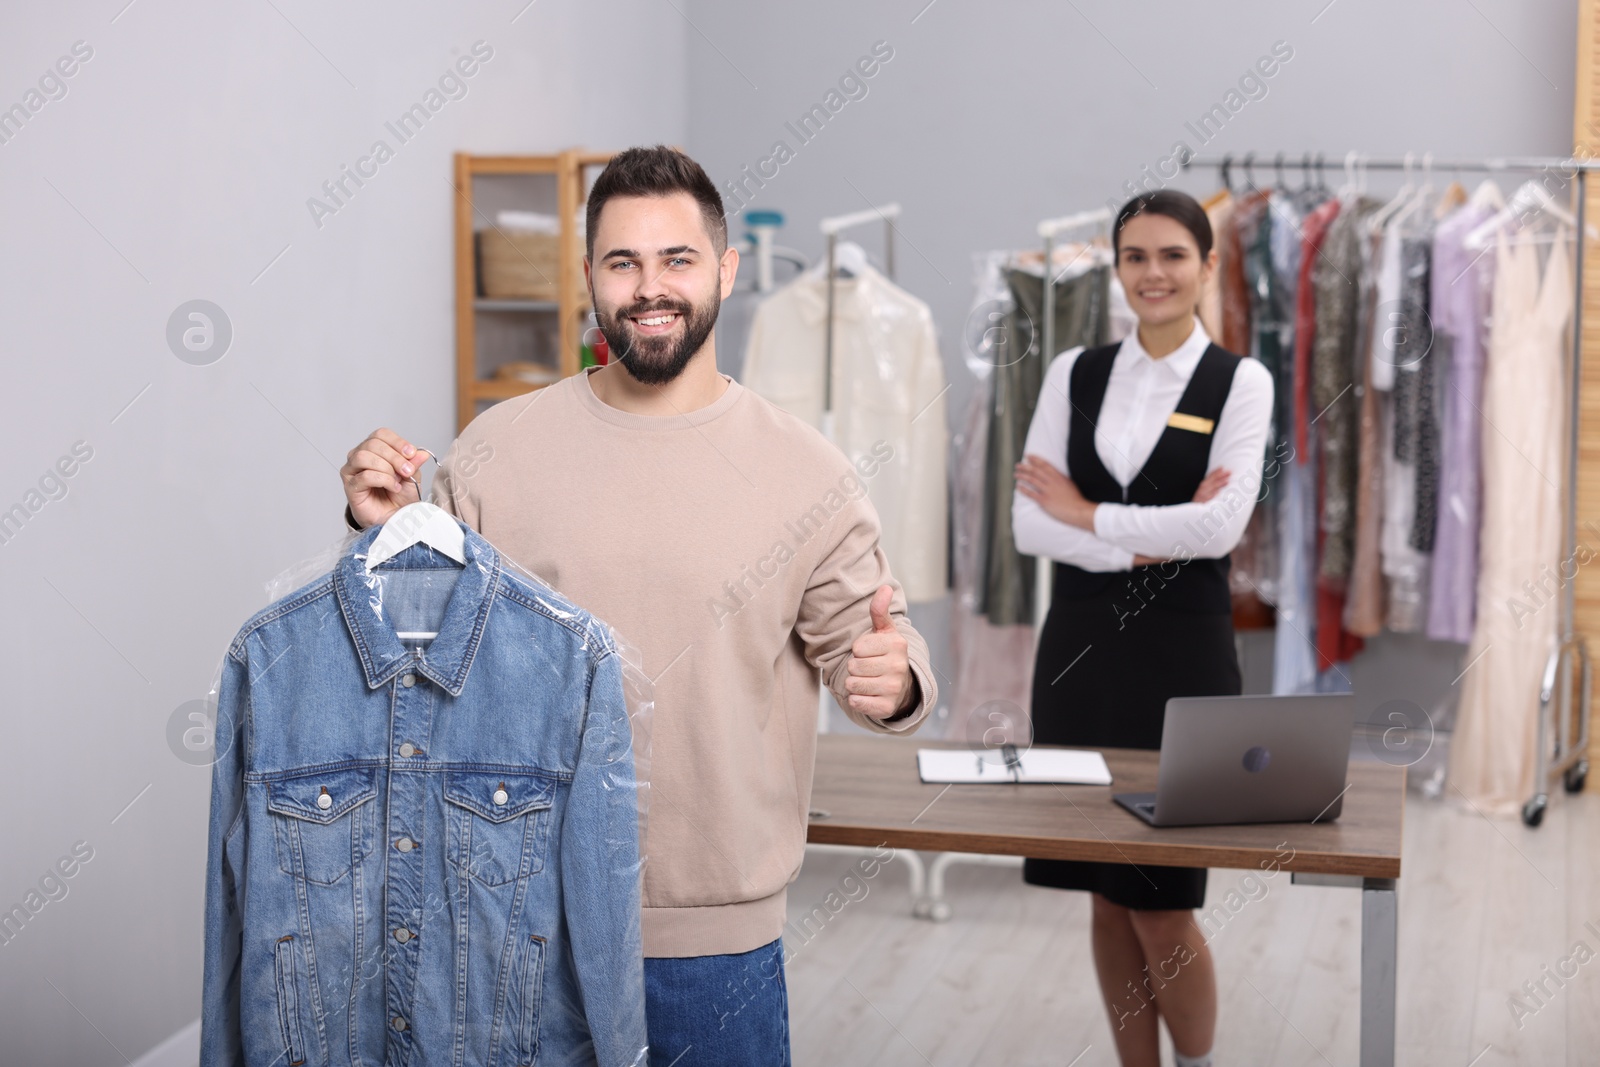 Photo of Dry-cleaning service. Man holding hanger with denim jacket and showing thumb up indoors. Happy worker at workplace